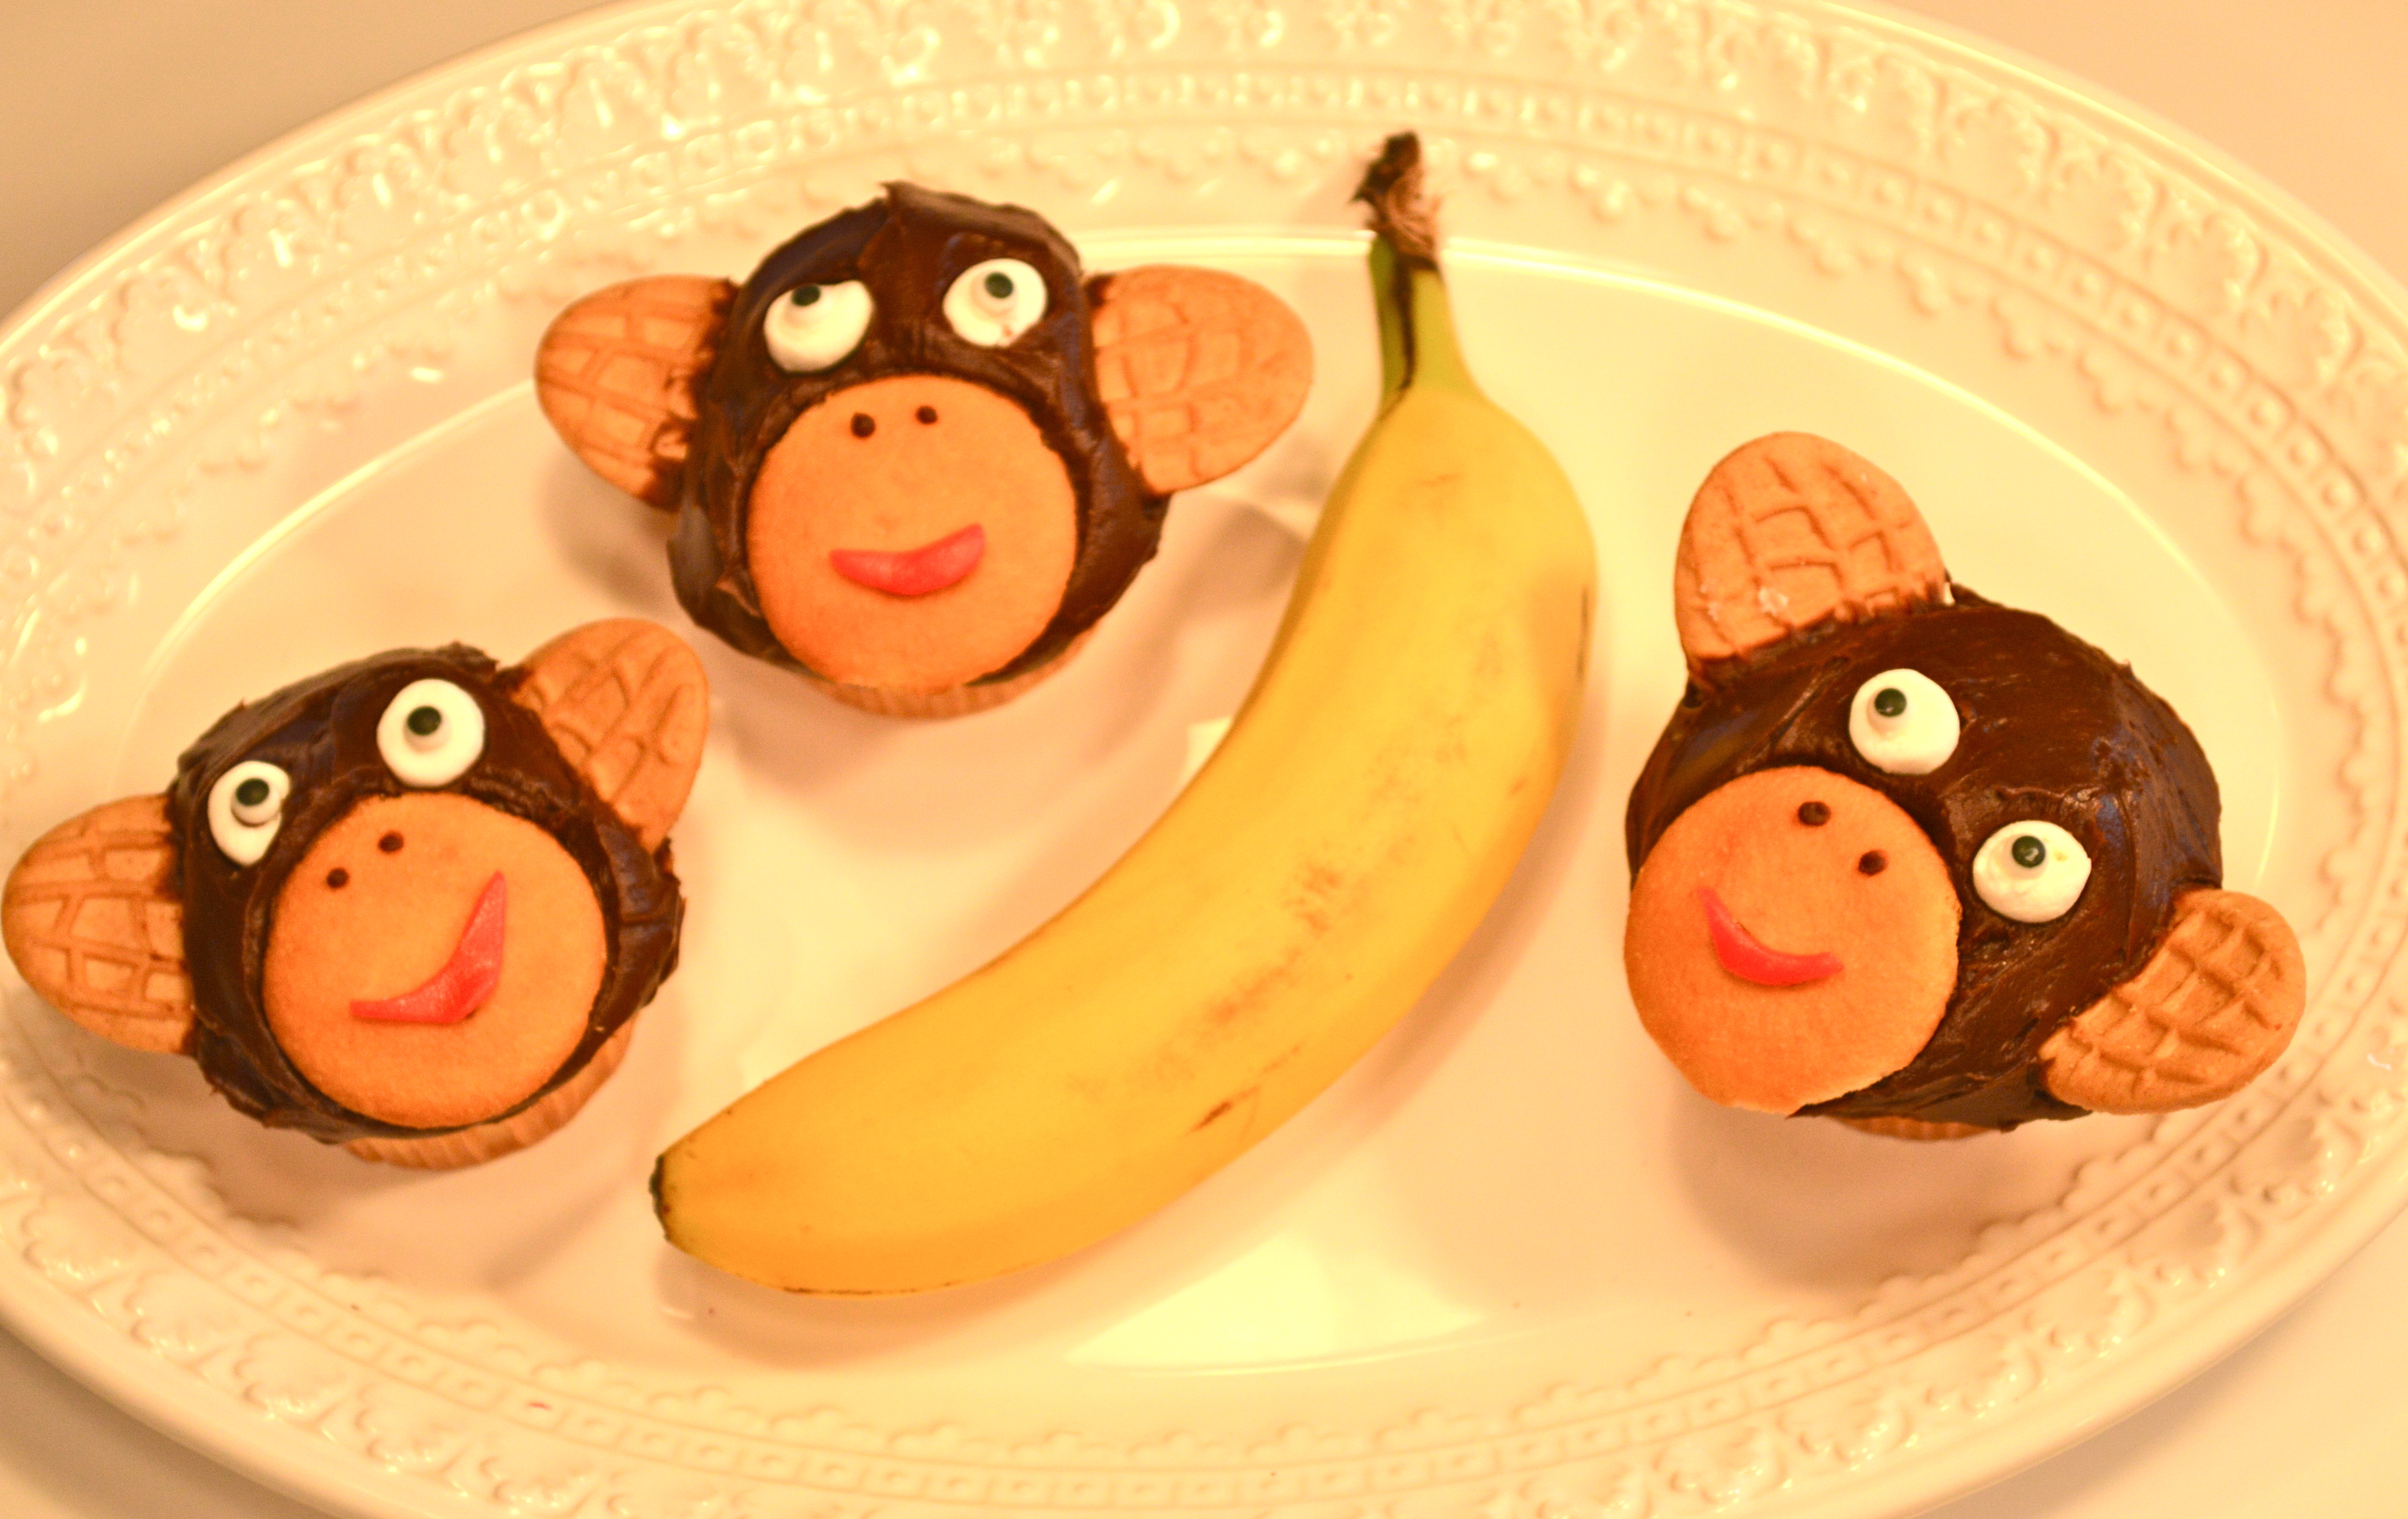 A bunch of monkey cupcakes